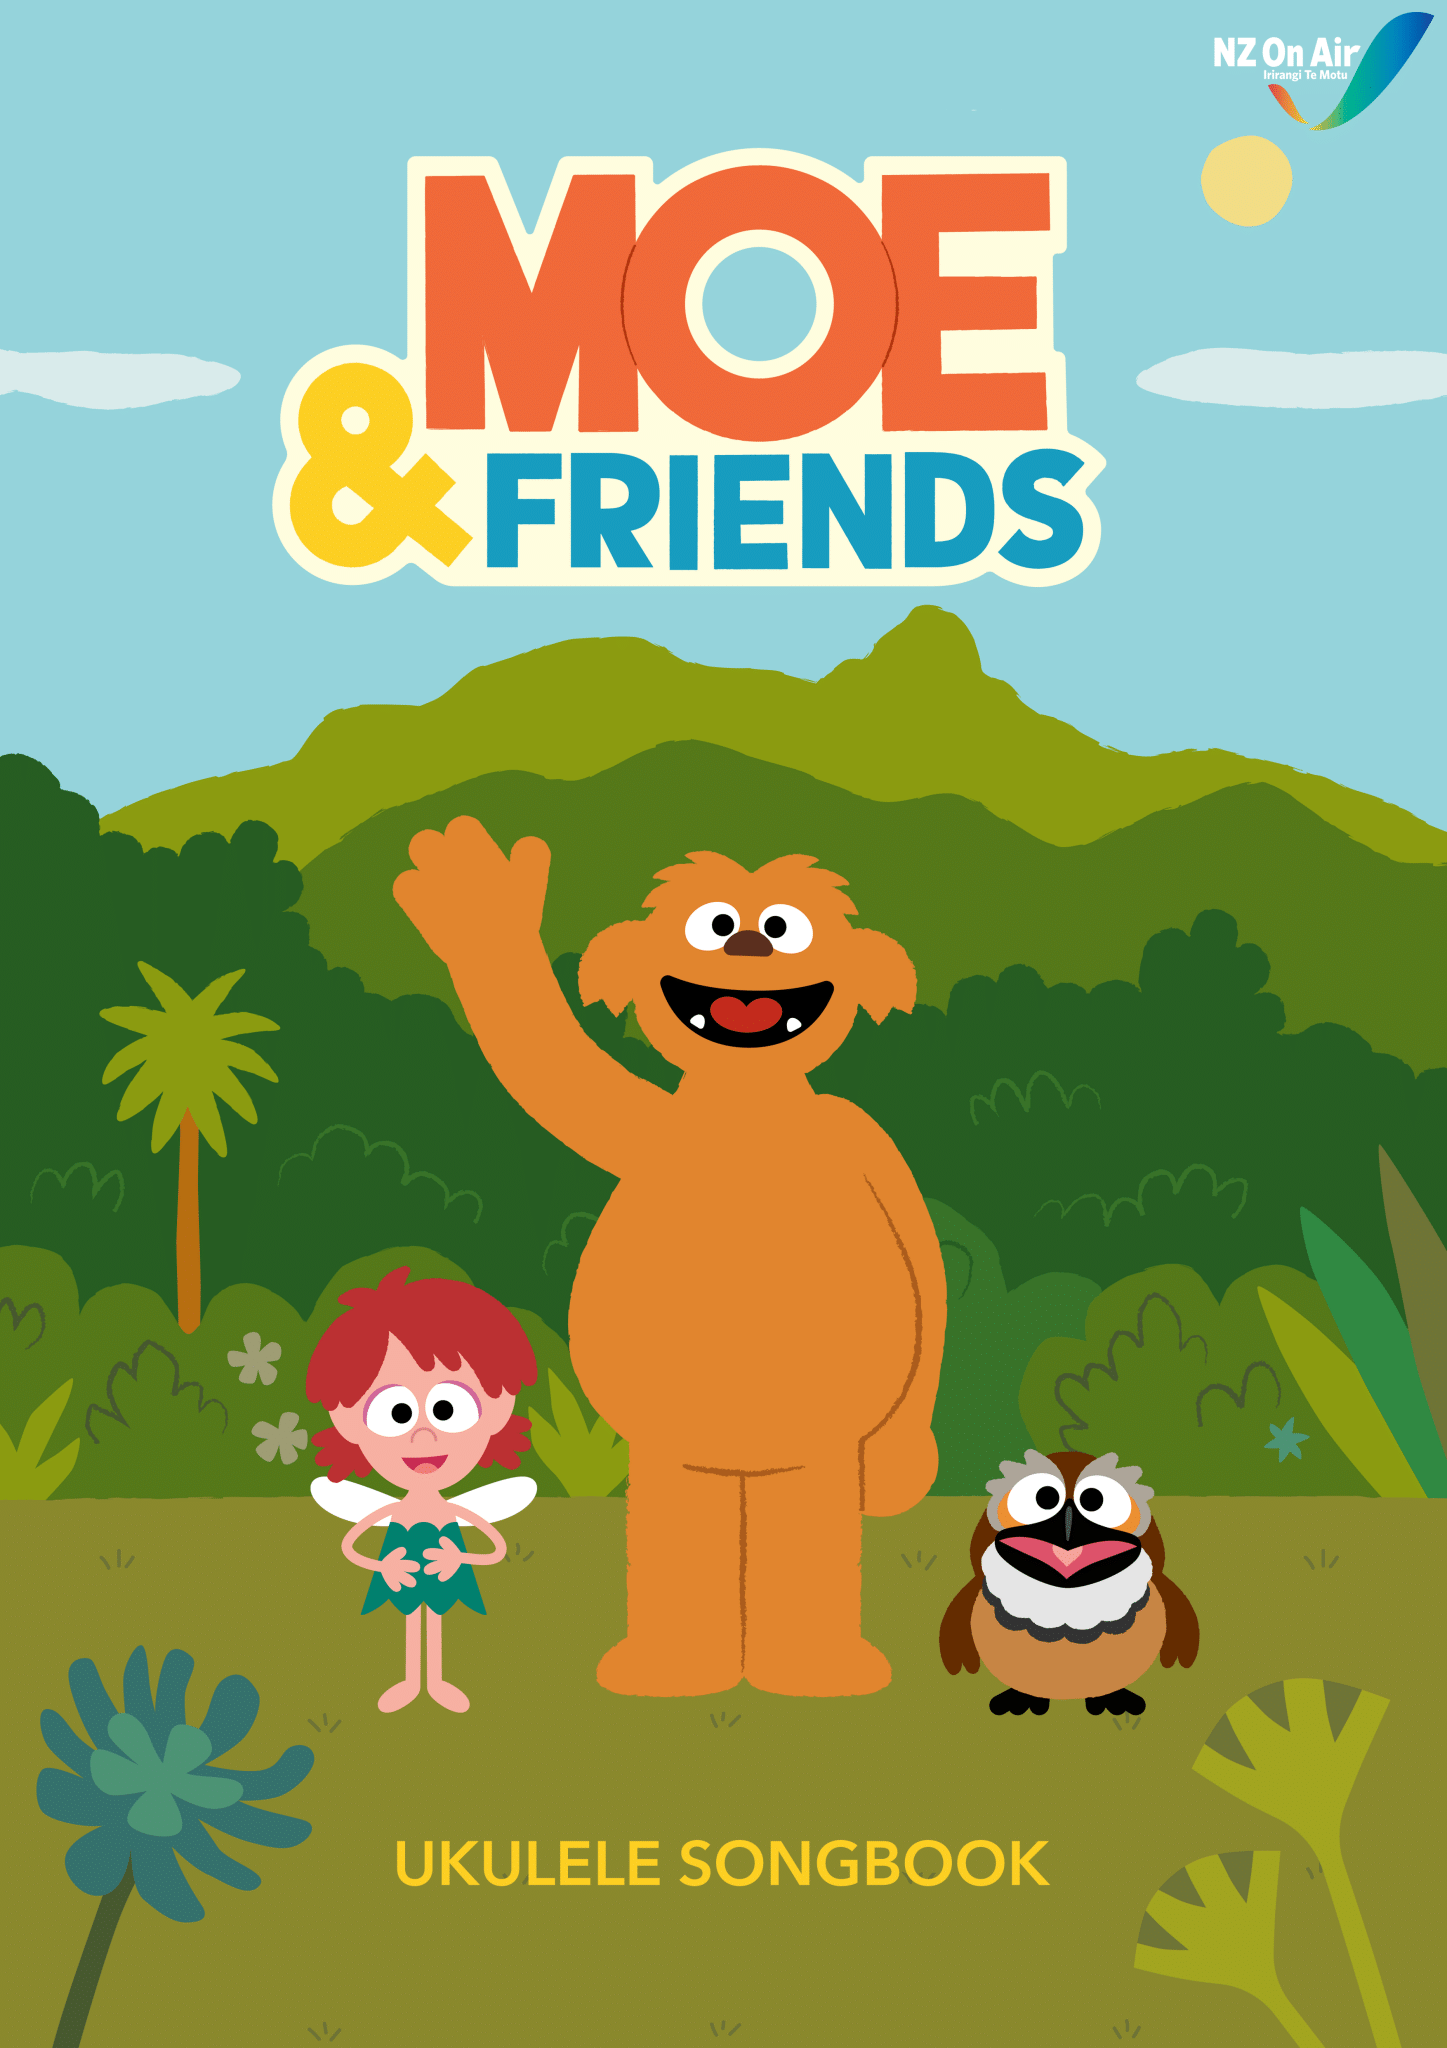 Moe and friends Ukelele songbook cover